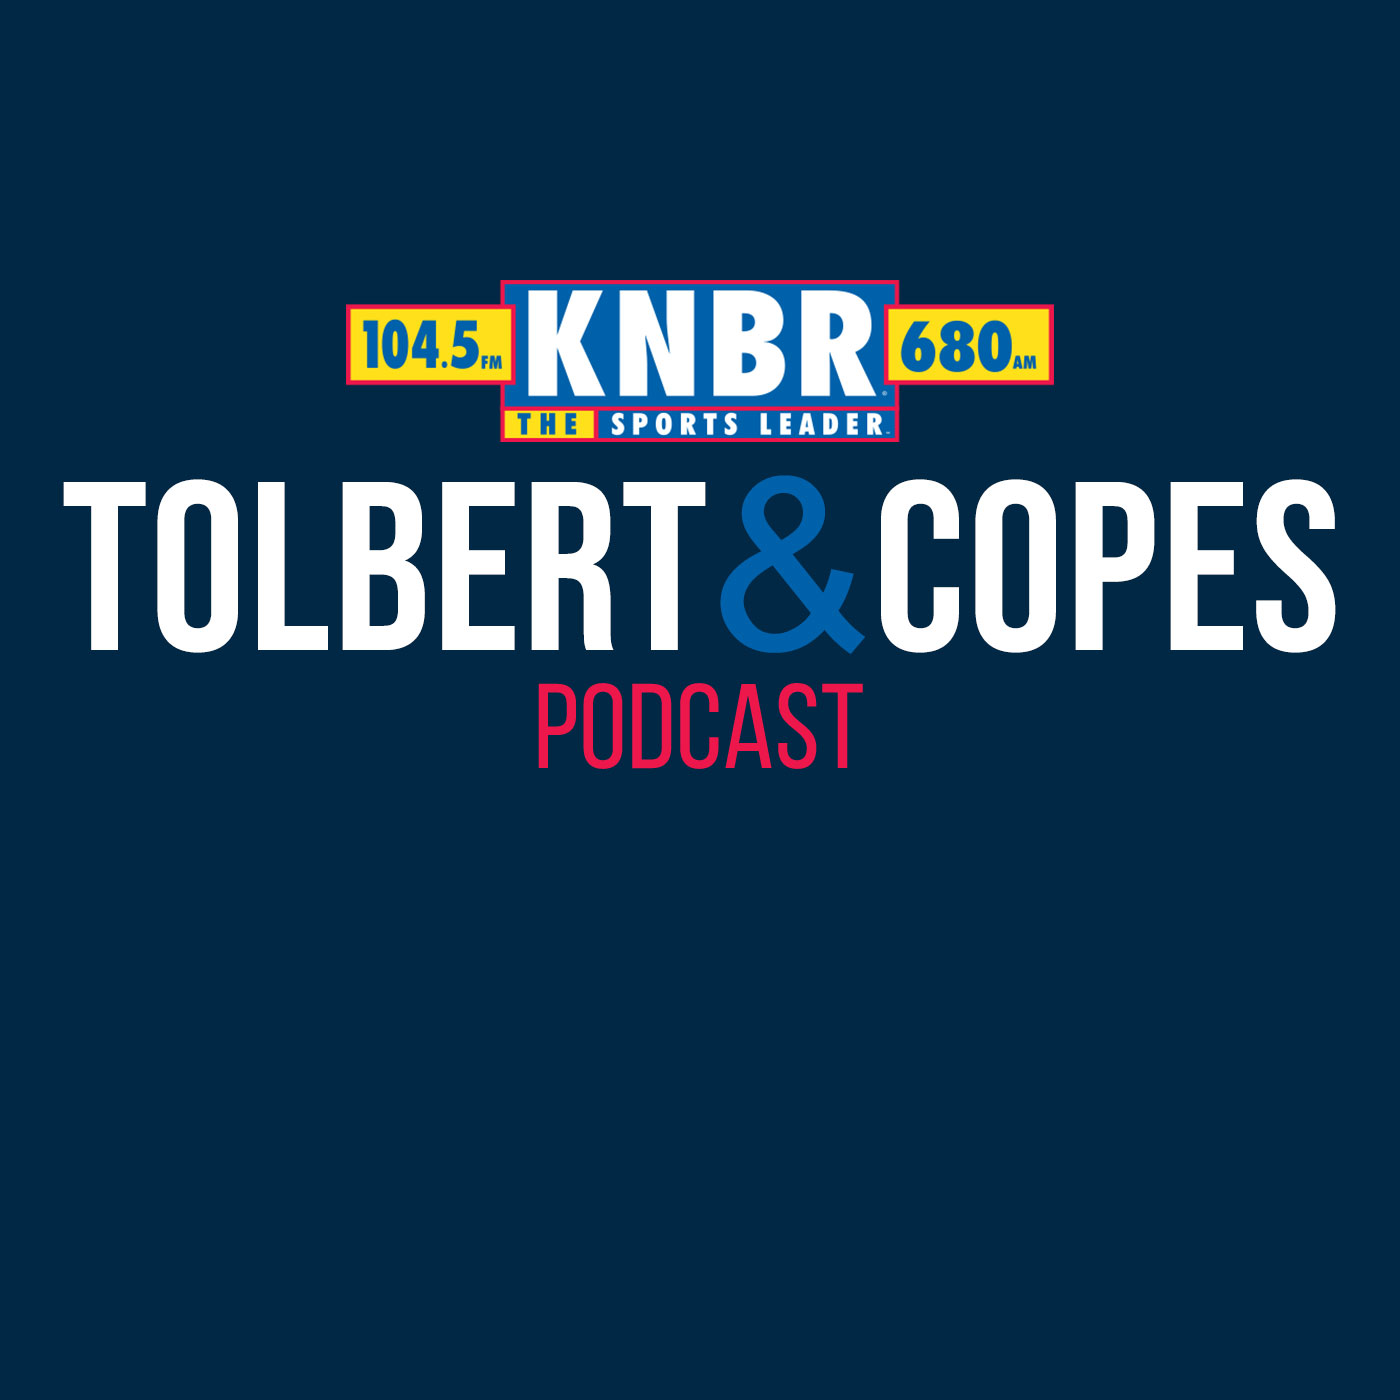 5-24 Marcus Thompson joins Tom Tolbert to discuss the NBA playoffs